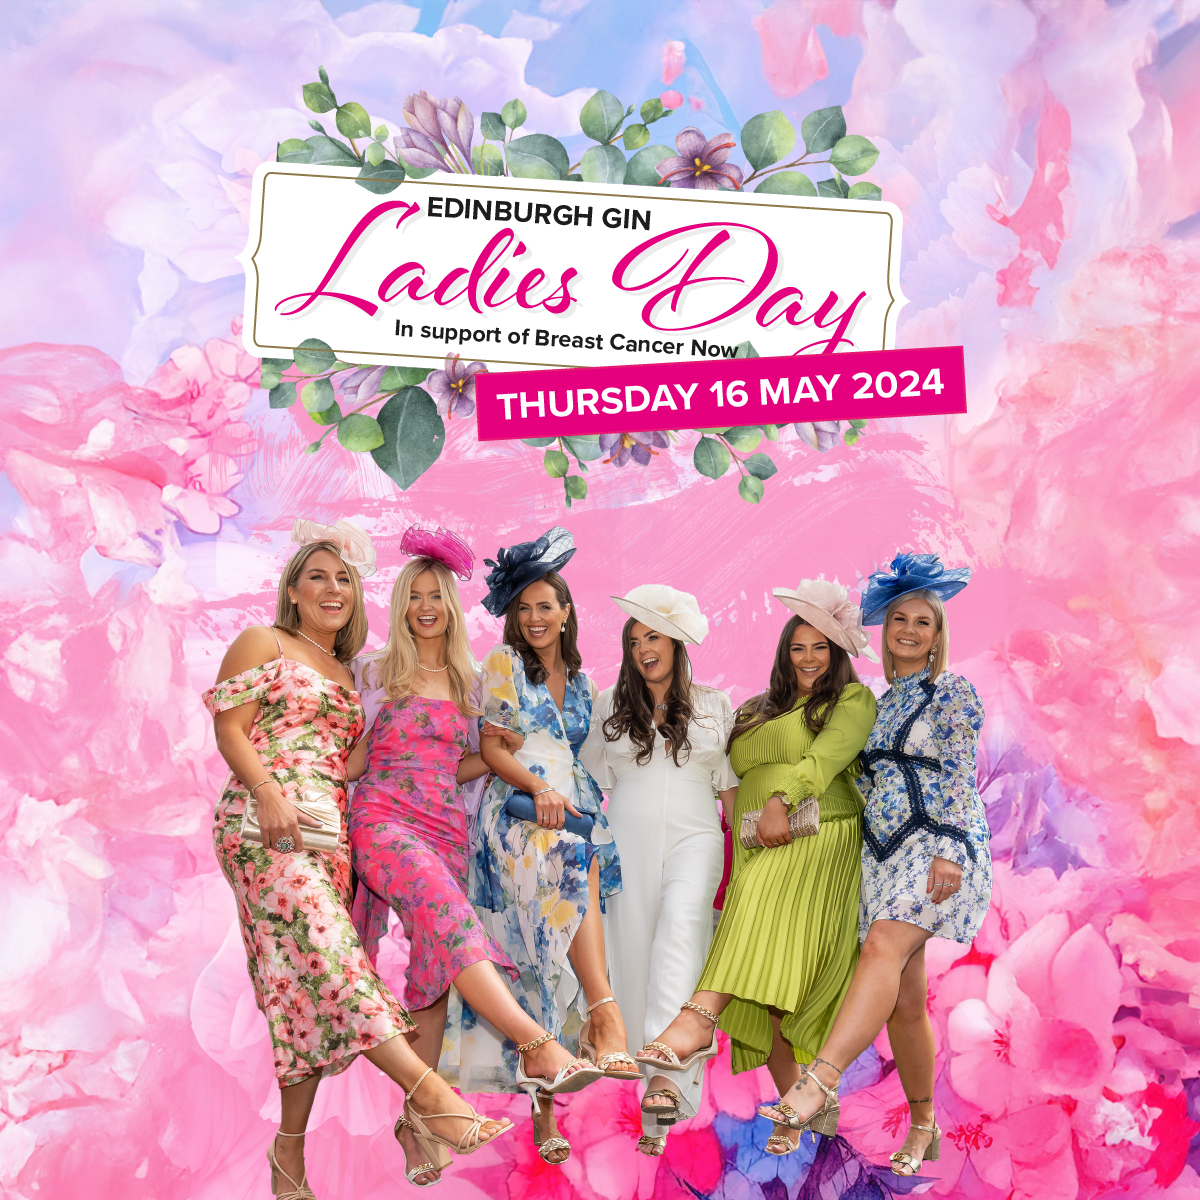 📢Additional Race New race start time for Thursday 16 May, Ladies Day First race now 13:40 Last race 17:05 Judge Jules LIVE on the Main Stage from 17:15 until 18:15 #PerthLadiesDay